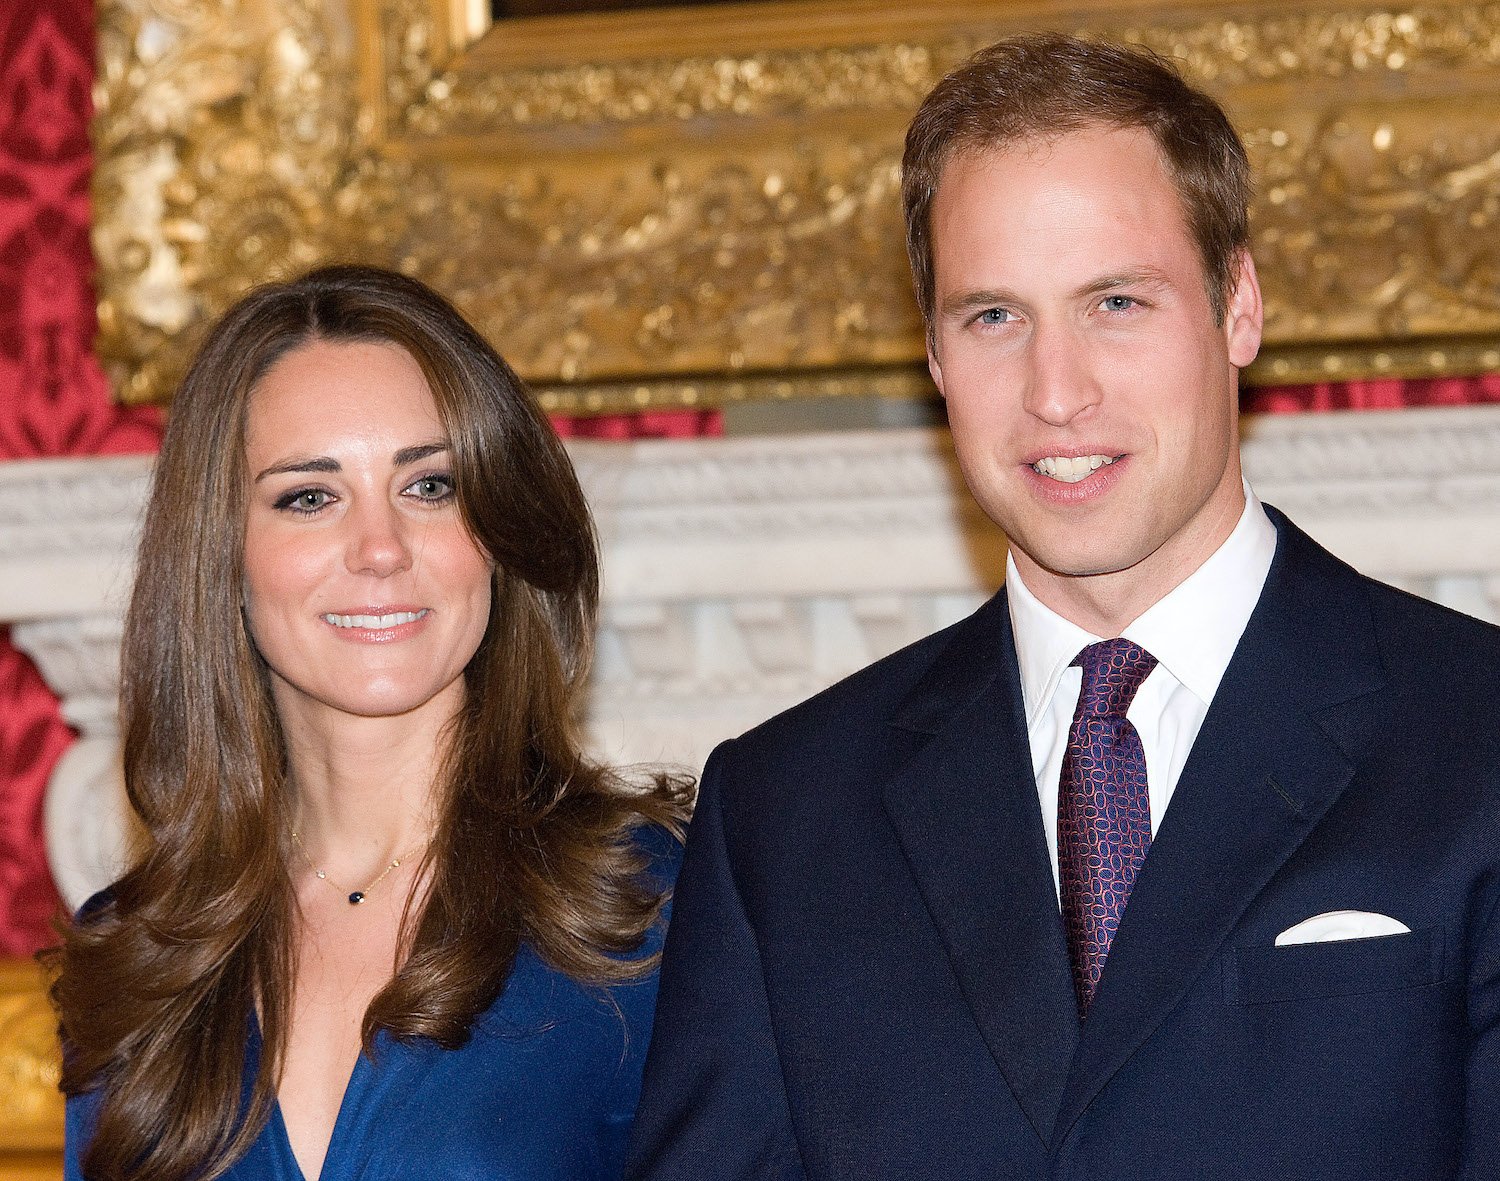 Prince William and Kate Middleton officially announce their engagement at St James's Palace on November 16, 2010